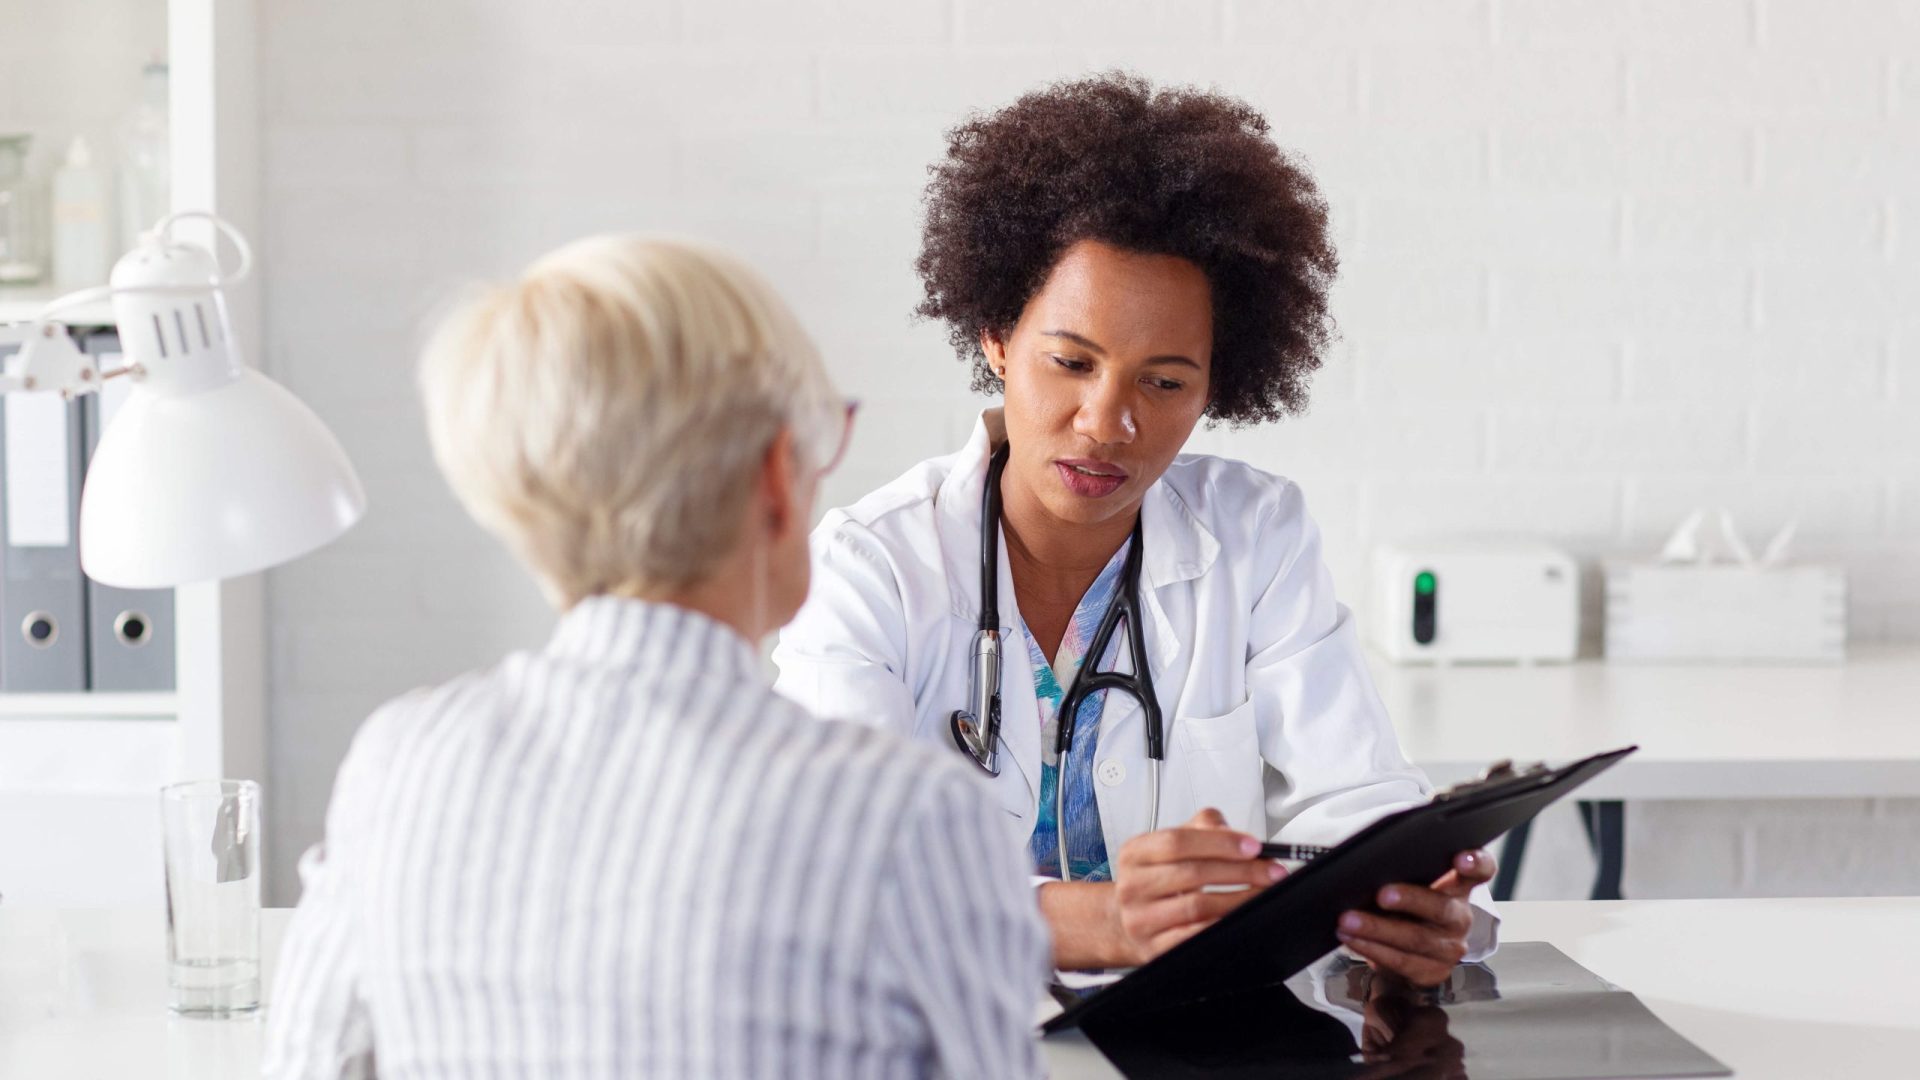 A female doctor discussing medical records with a patient in a clinic.